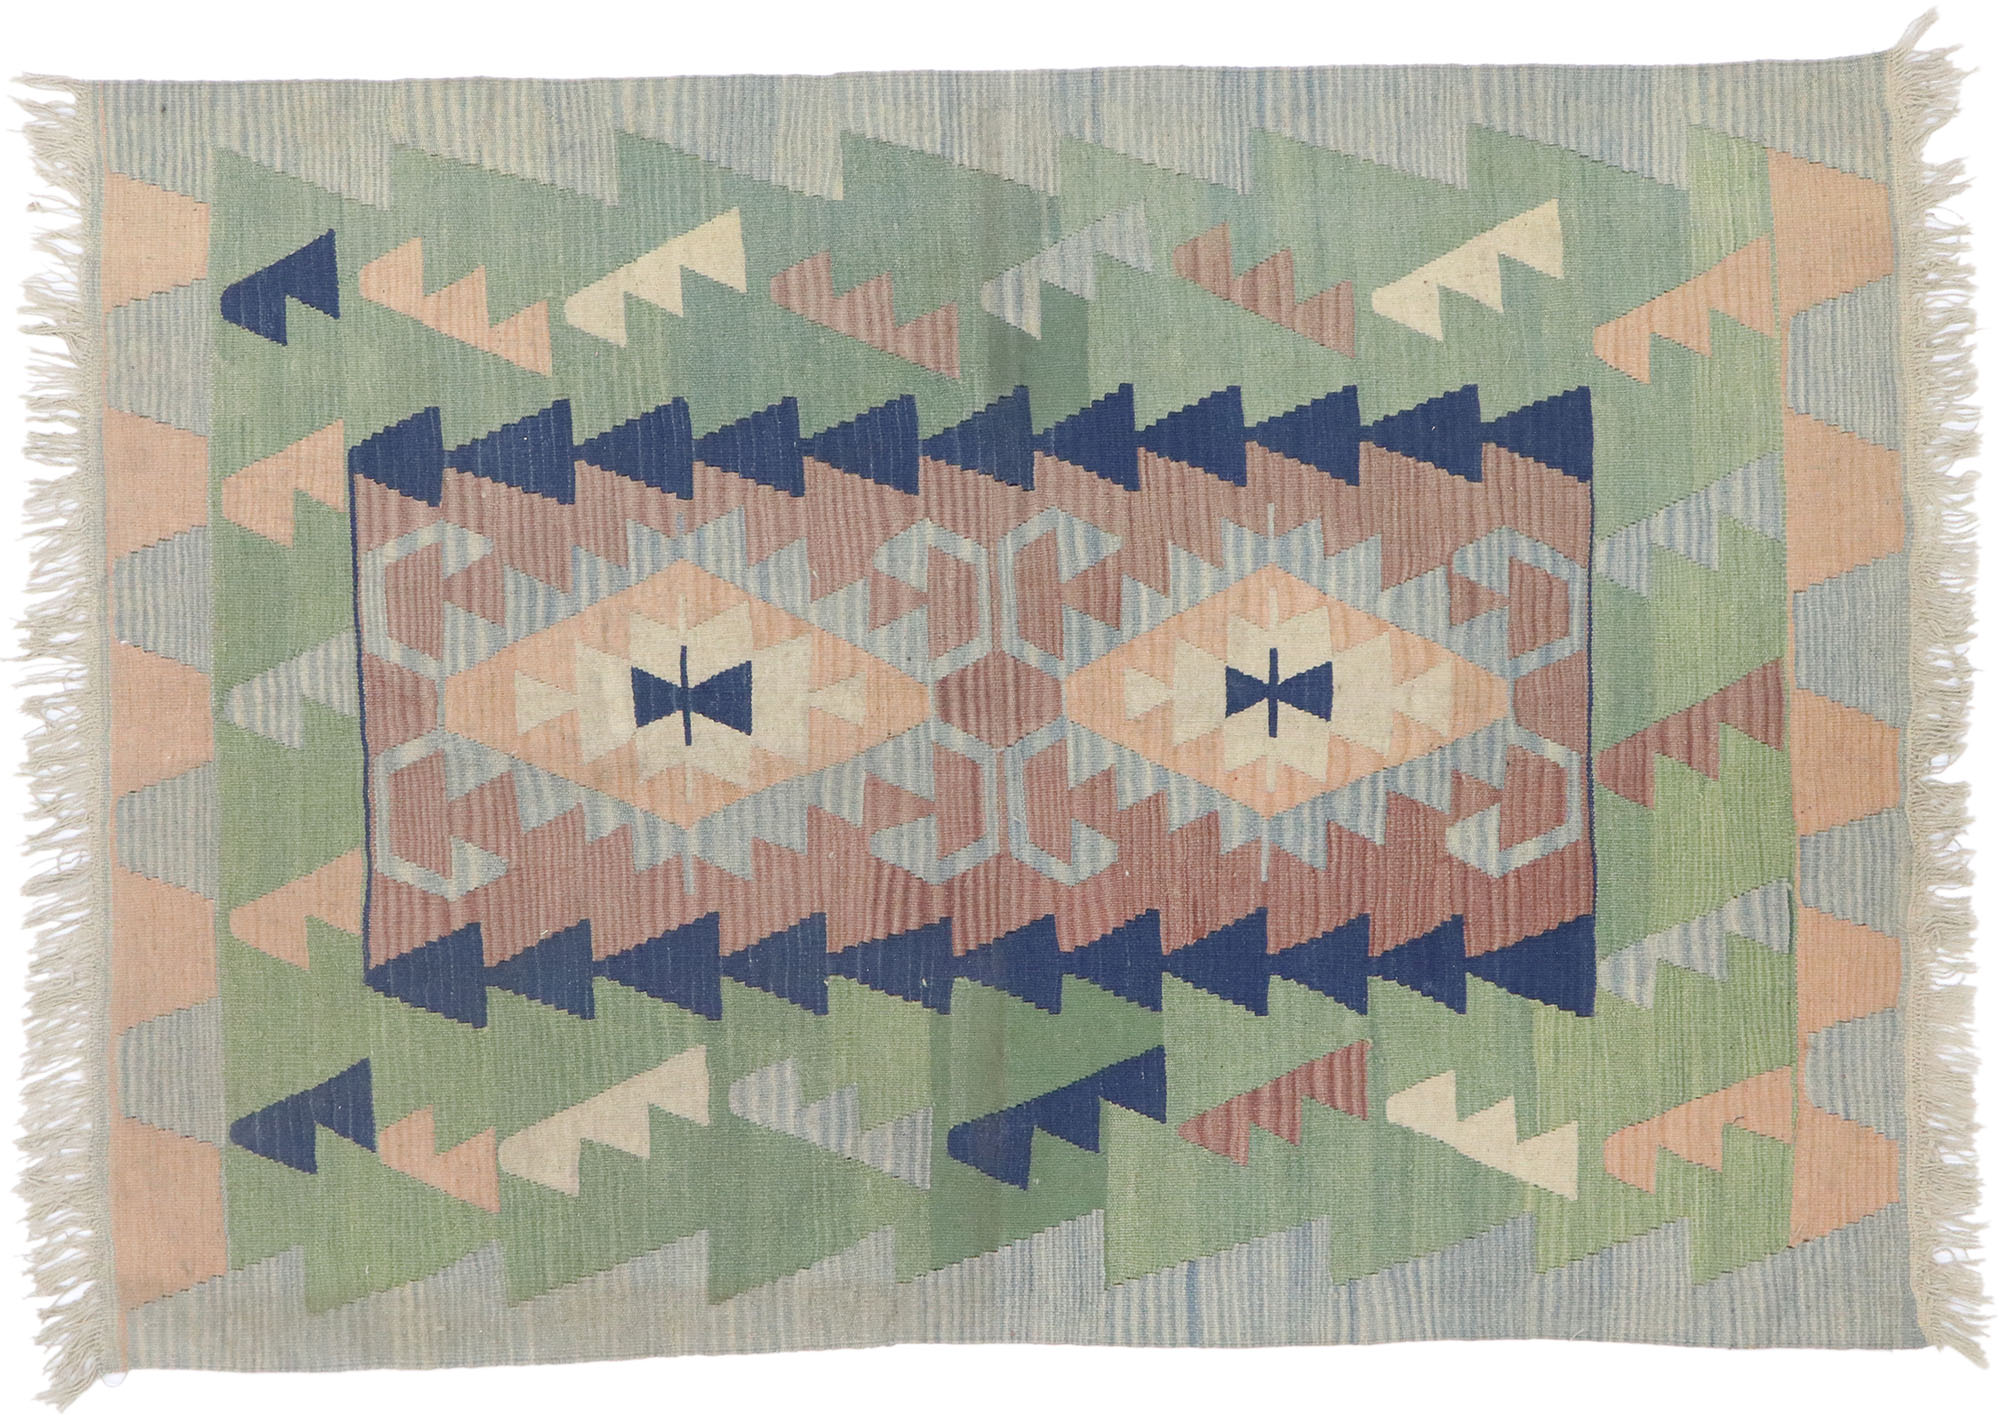 The simpler geometric pattern gives this vintage Shiraz rug a less formal feel than that of other Persian rugs.
